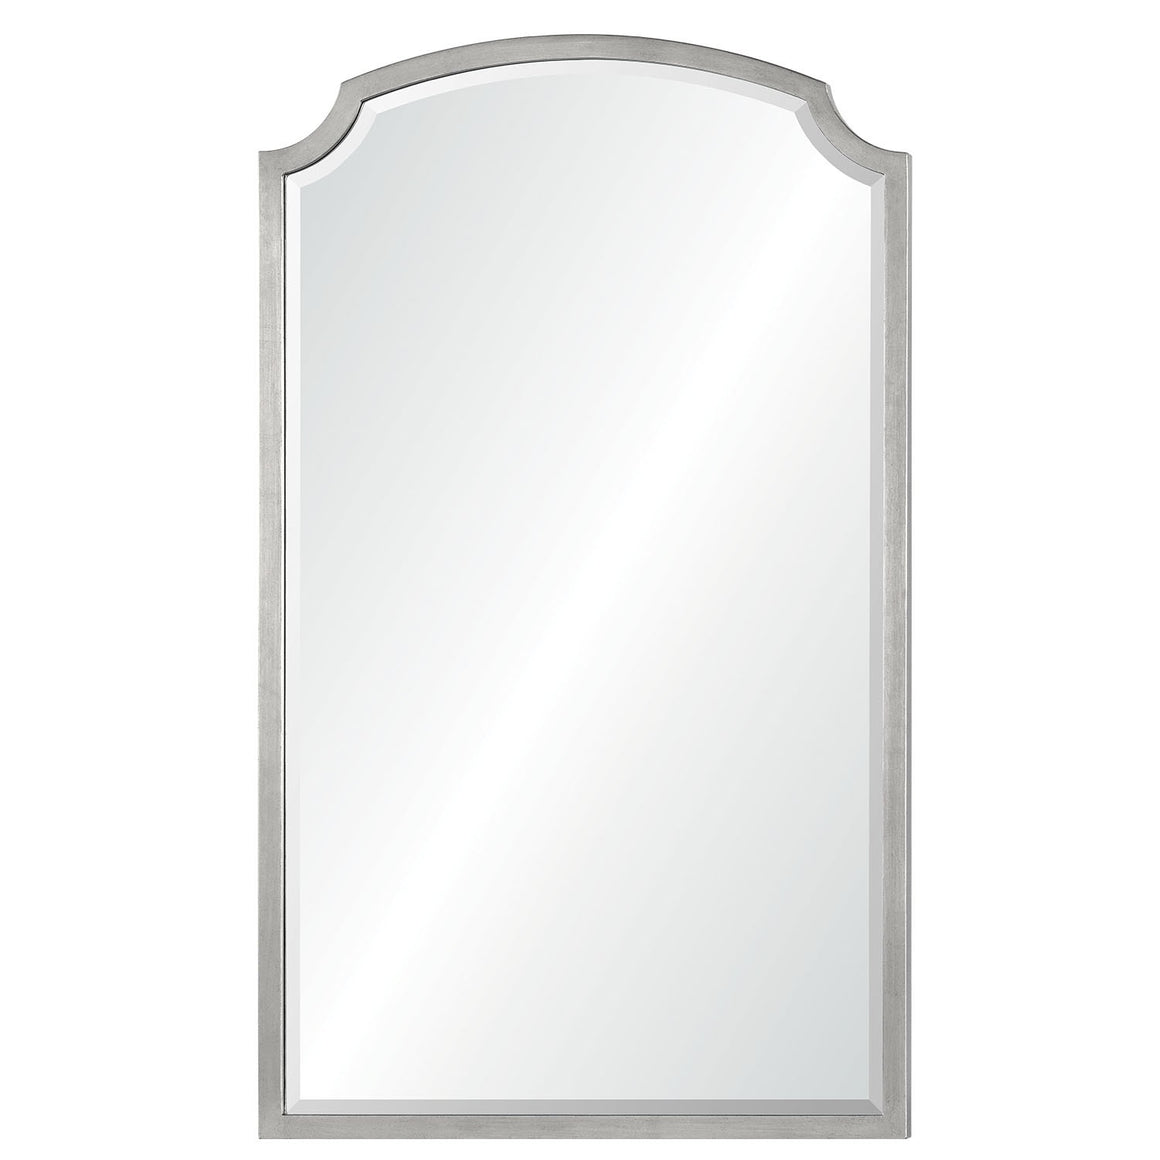 Arched Mirror - Available in 2 Finishes